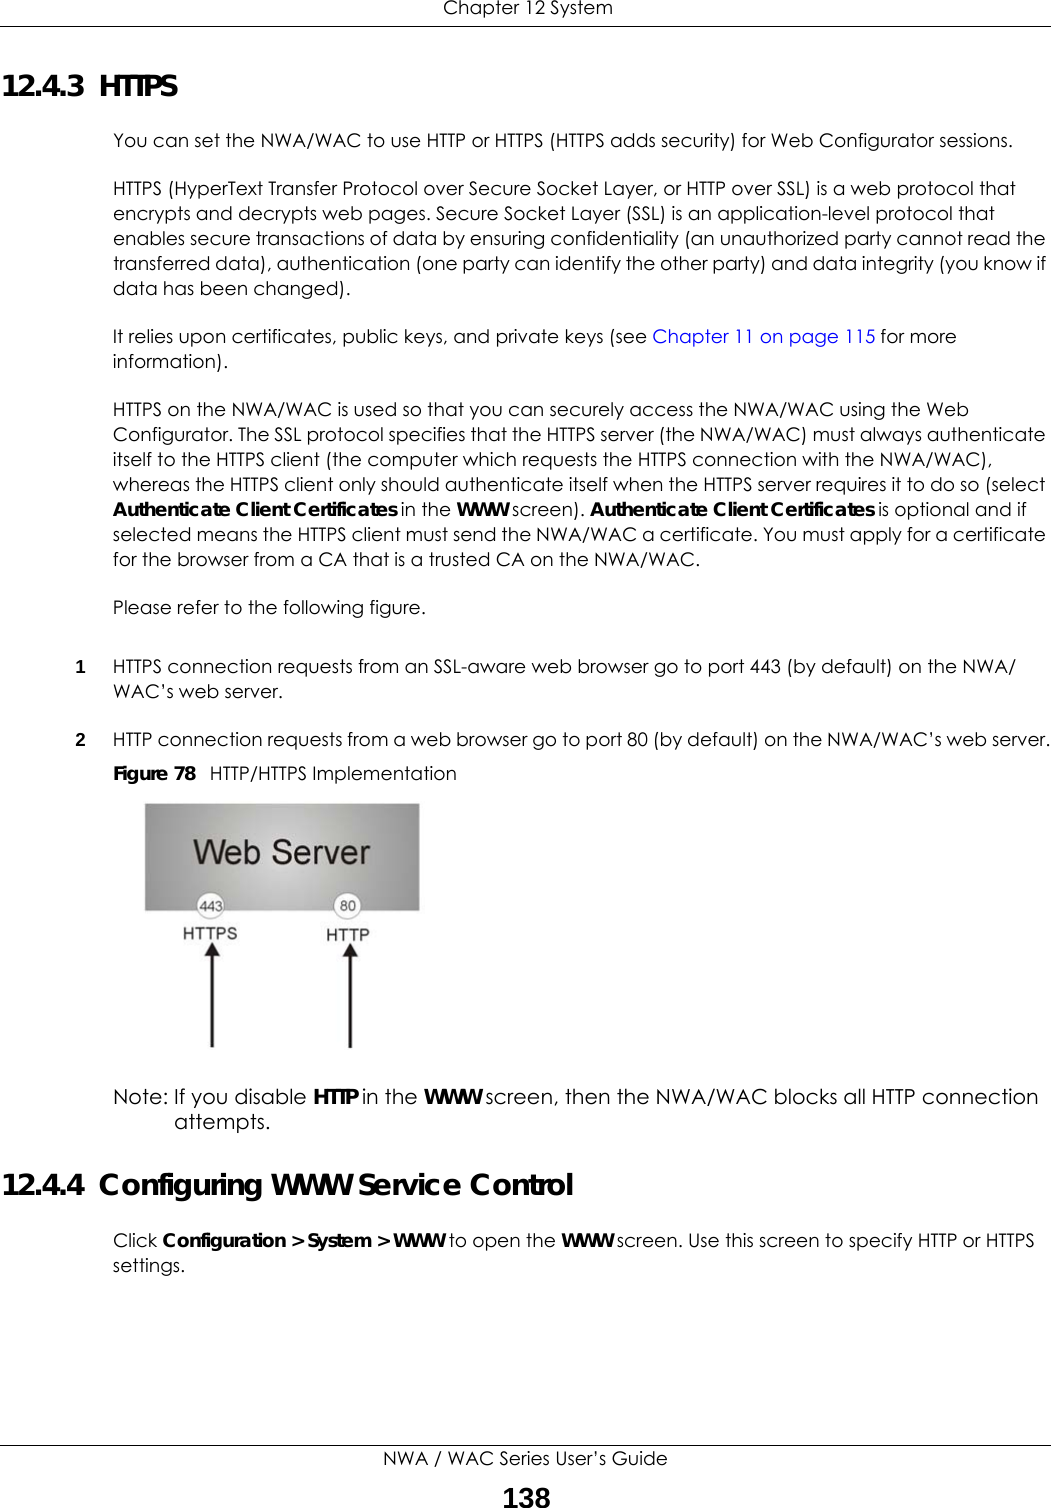  Chapter 12 SystemNWA / WAC Series User’s Guide13812.4.3  HTTPSYou can set the NWA/WAC to use HTTP or HTTPS (HTTPS adds security) for Web Configurator sessions. HTTPS (HyperText Transfer Protocol over Secure Socket Layer, or HTTP over SSL) is a web protocol that encrypts and decrypts web pages. Secure Socket Layer (SSL) is an application-level protocol that enables secure transactions of data by ensuring confidentiality (an unauthorized party cannot read the transferred data), authentication (one party can identify the other party) and data integrity (you know if data has been changed). It relies upon certificates, public keys, and private keys (see Chapter 11 on page 115 for more information).HTTPS on the NWA/WAC is used so that you can securely access the NWA/WAC using the Web Configurator. The SSL protocol specifies that the HTTPS server (the NWA/WAC) must always authenticate itself to the HTTPS client (the computer which requests the HTTPS connection with the NWA/WAC), whereas the HTTPS client only should authenticate itself when the HTTPS server requires it to do so (select Authenticate Client Certificates in the WWW screen). Authenticate Client Certificates is optional and if selected means the HTTPS client must send the NWA/WAC a certificate. You must apply for a certificate for the browser from a CA that is a trusted CA on the NWA/WAC.Please refer to the following figure.1HTTPS connection requests from an SSL-aware web browser go to port 443 (by default) on the NWA/WAC’s web server.2HTTP connection requests from a web browser go to port 80 (by default) on the NWA/WAC’s web server.Figure 78   HTTP/HTTPS ImplementationNote: If you disable HTTP in the WWW screen, then the NWA/WAC blocks all HTTP connection attempts.12.4.4  Configuring WWW Service ControlClick Configuration &gt; System &gt; WWW to open the WWW screen. Use this screen to specify HTTP or HTTPS settings. 